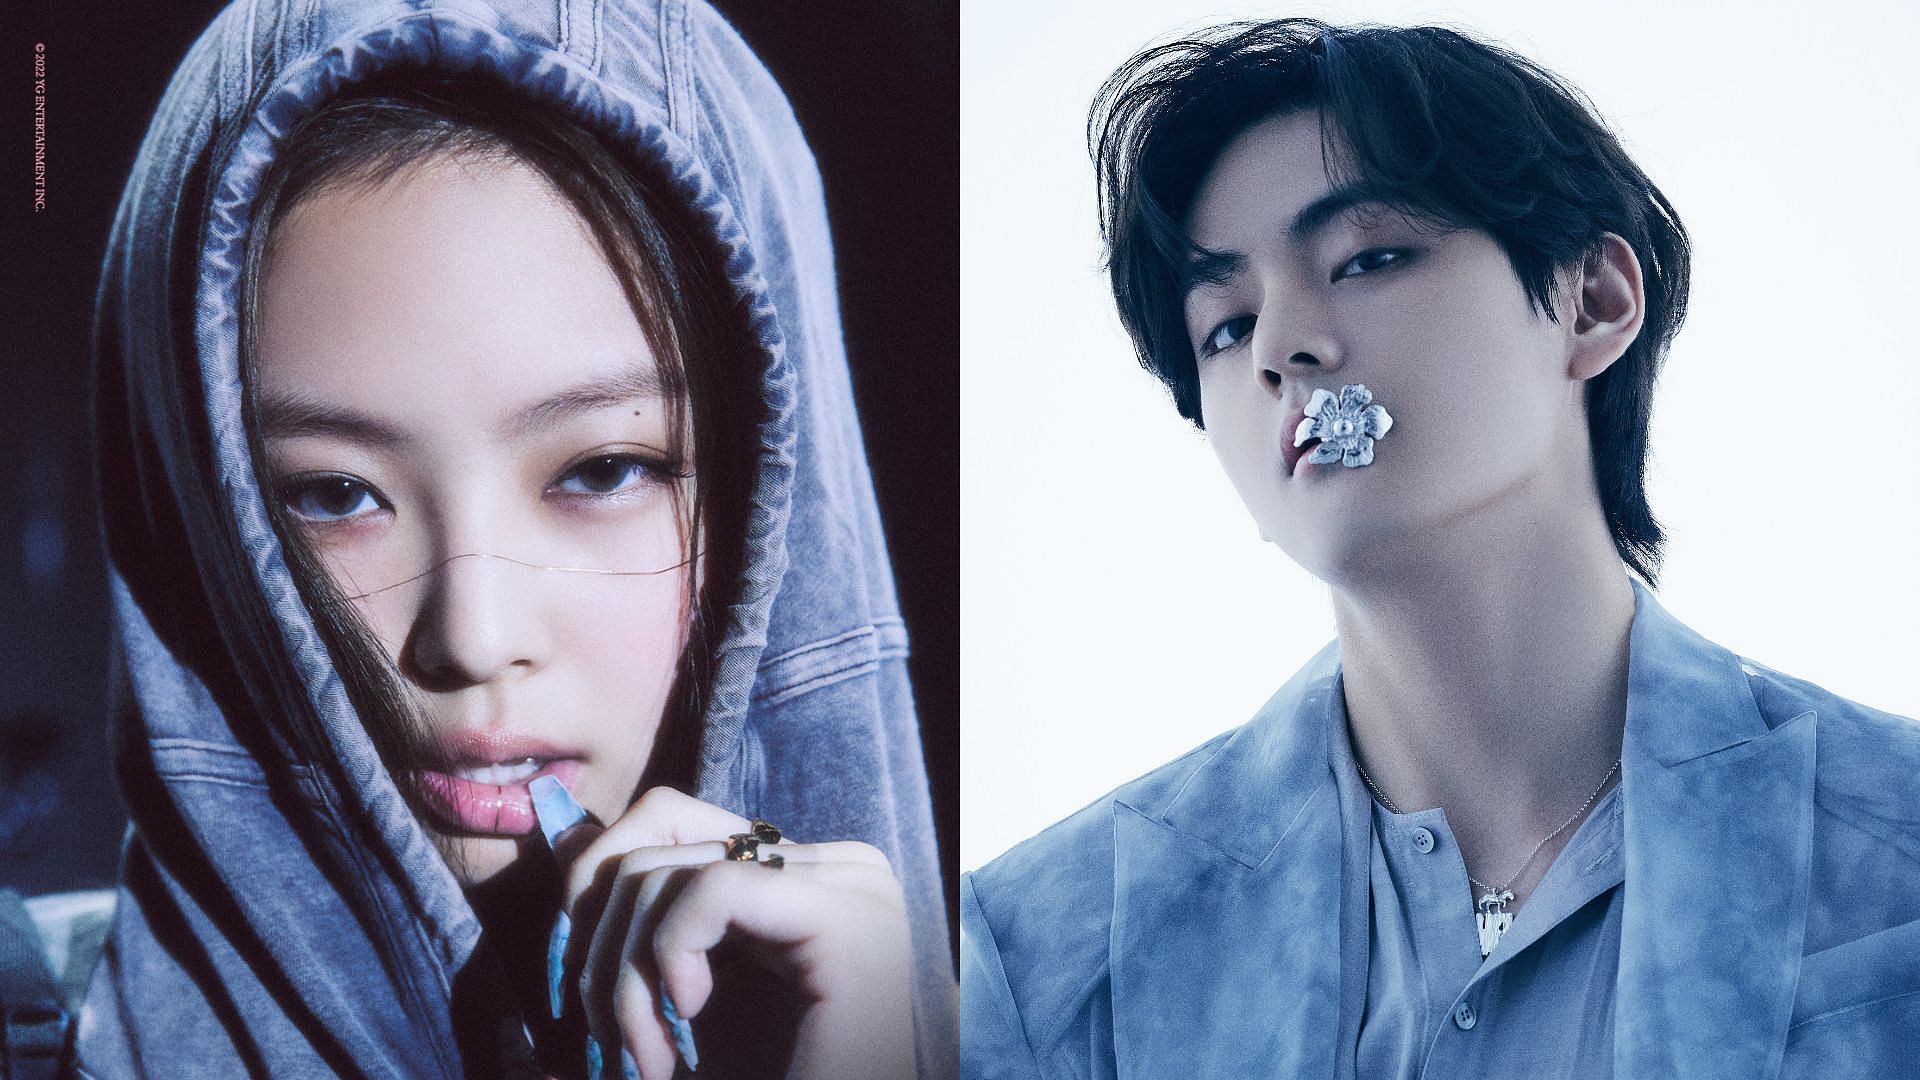 BTS&#039; V and BLACKPINK&#039;s Jennie are embroiled in dating rumors (Image via BIG HIT MUSIC and YG Entertainment)